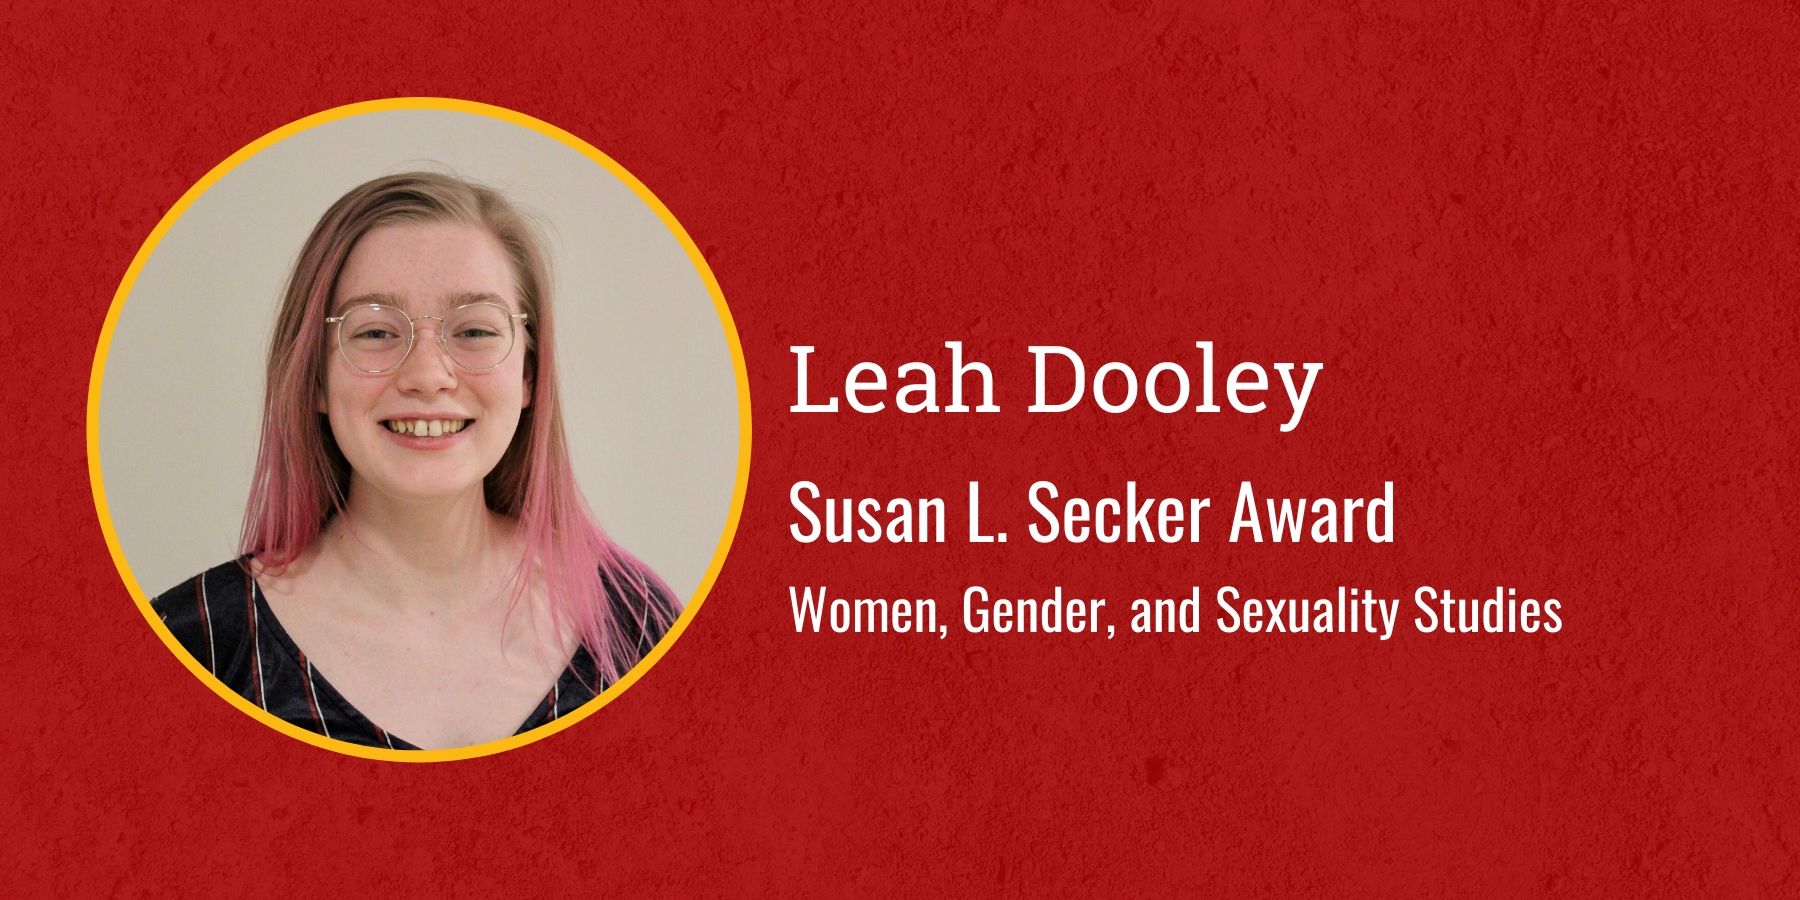 Photo of Leah Dooley and text Susan L. Secker Award, Women, Gender, and Sexuality Studies